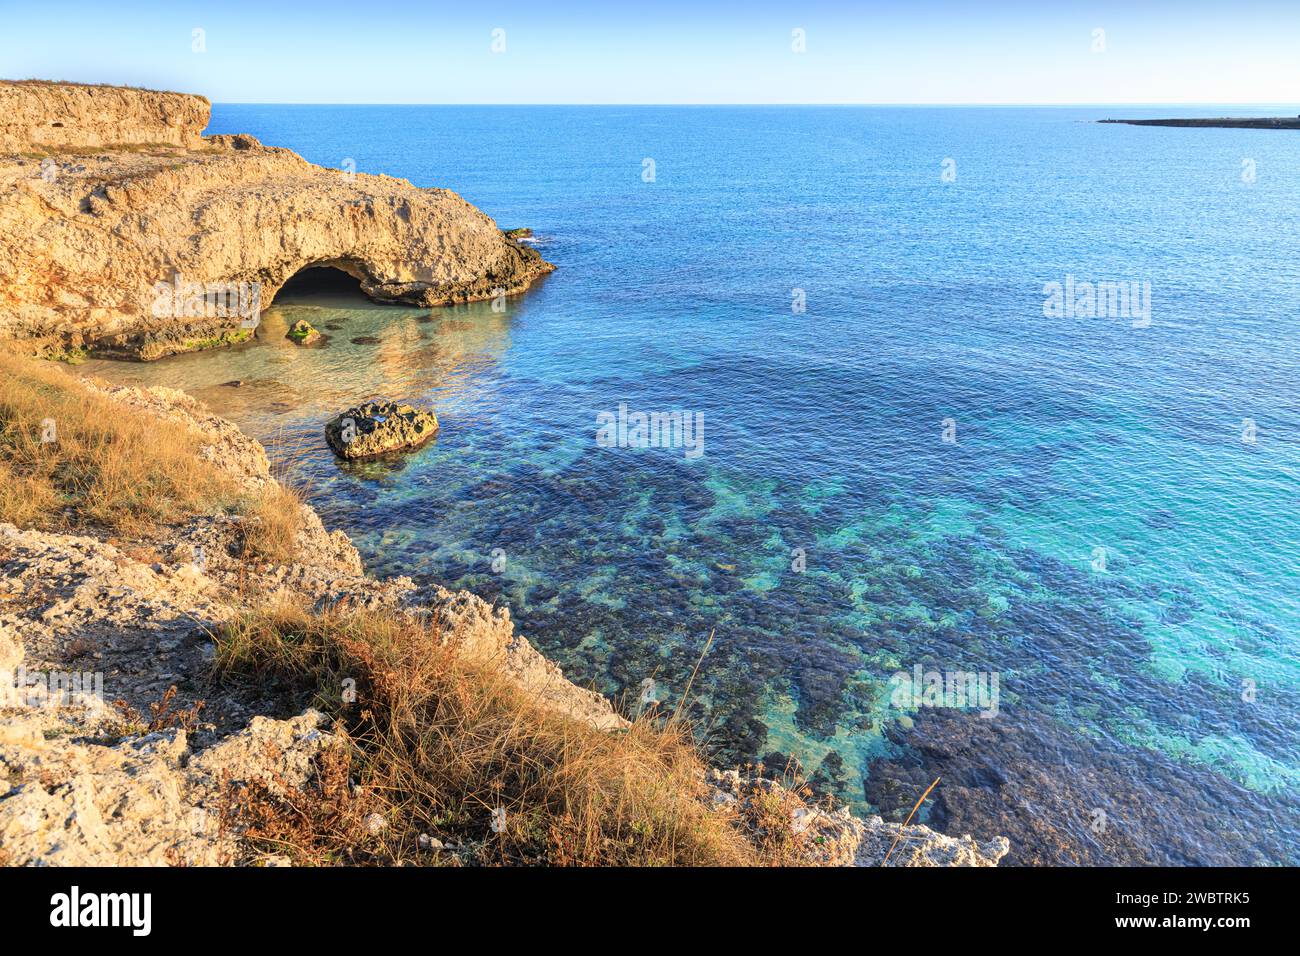 The most beautiful Apulian coast in Italy: Cala Corvino. Typical coastline near Monopoli : high and rocky coast characterized by small sandy coves wit Stock Photo